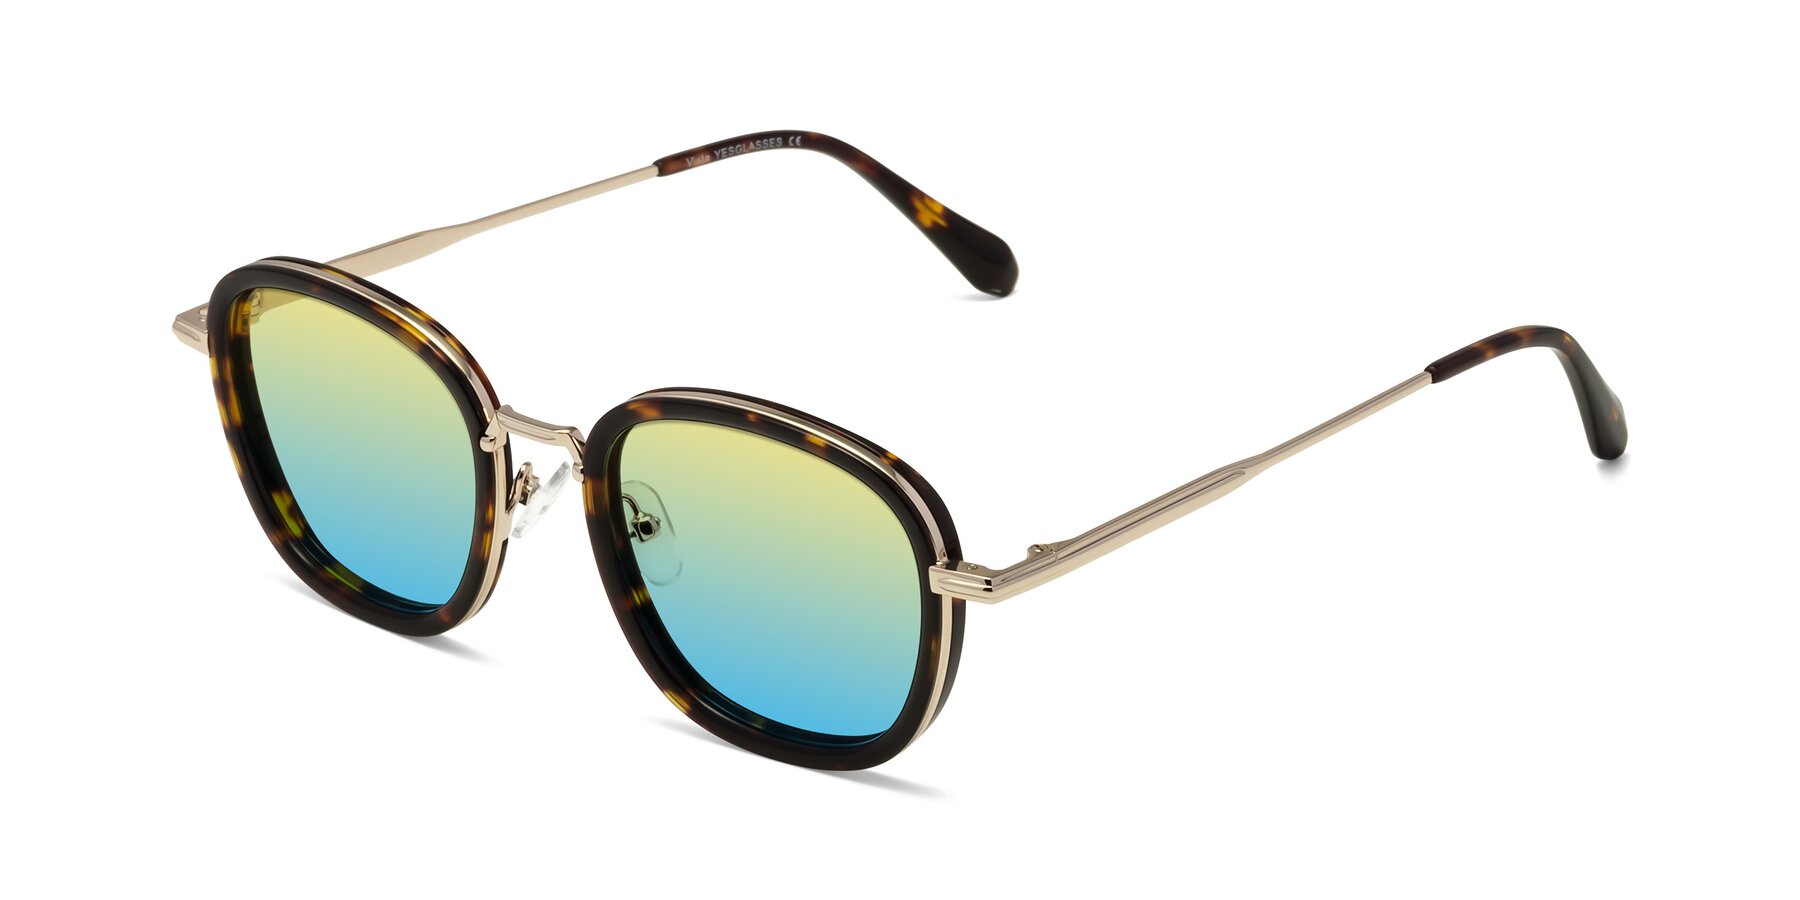 Angle of Vista in Tortoise-Light Gold with Yellow / Blue Gradient Lenses